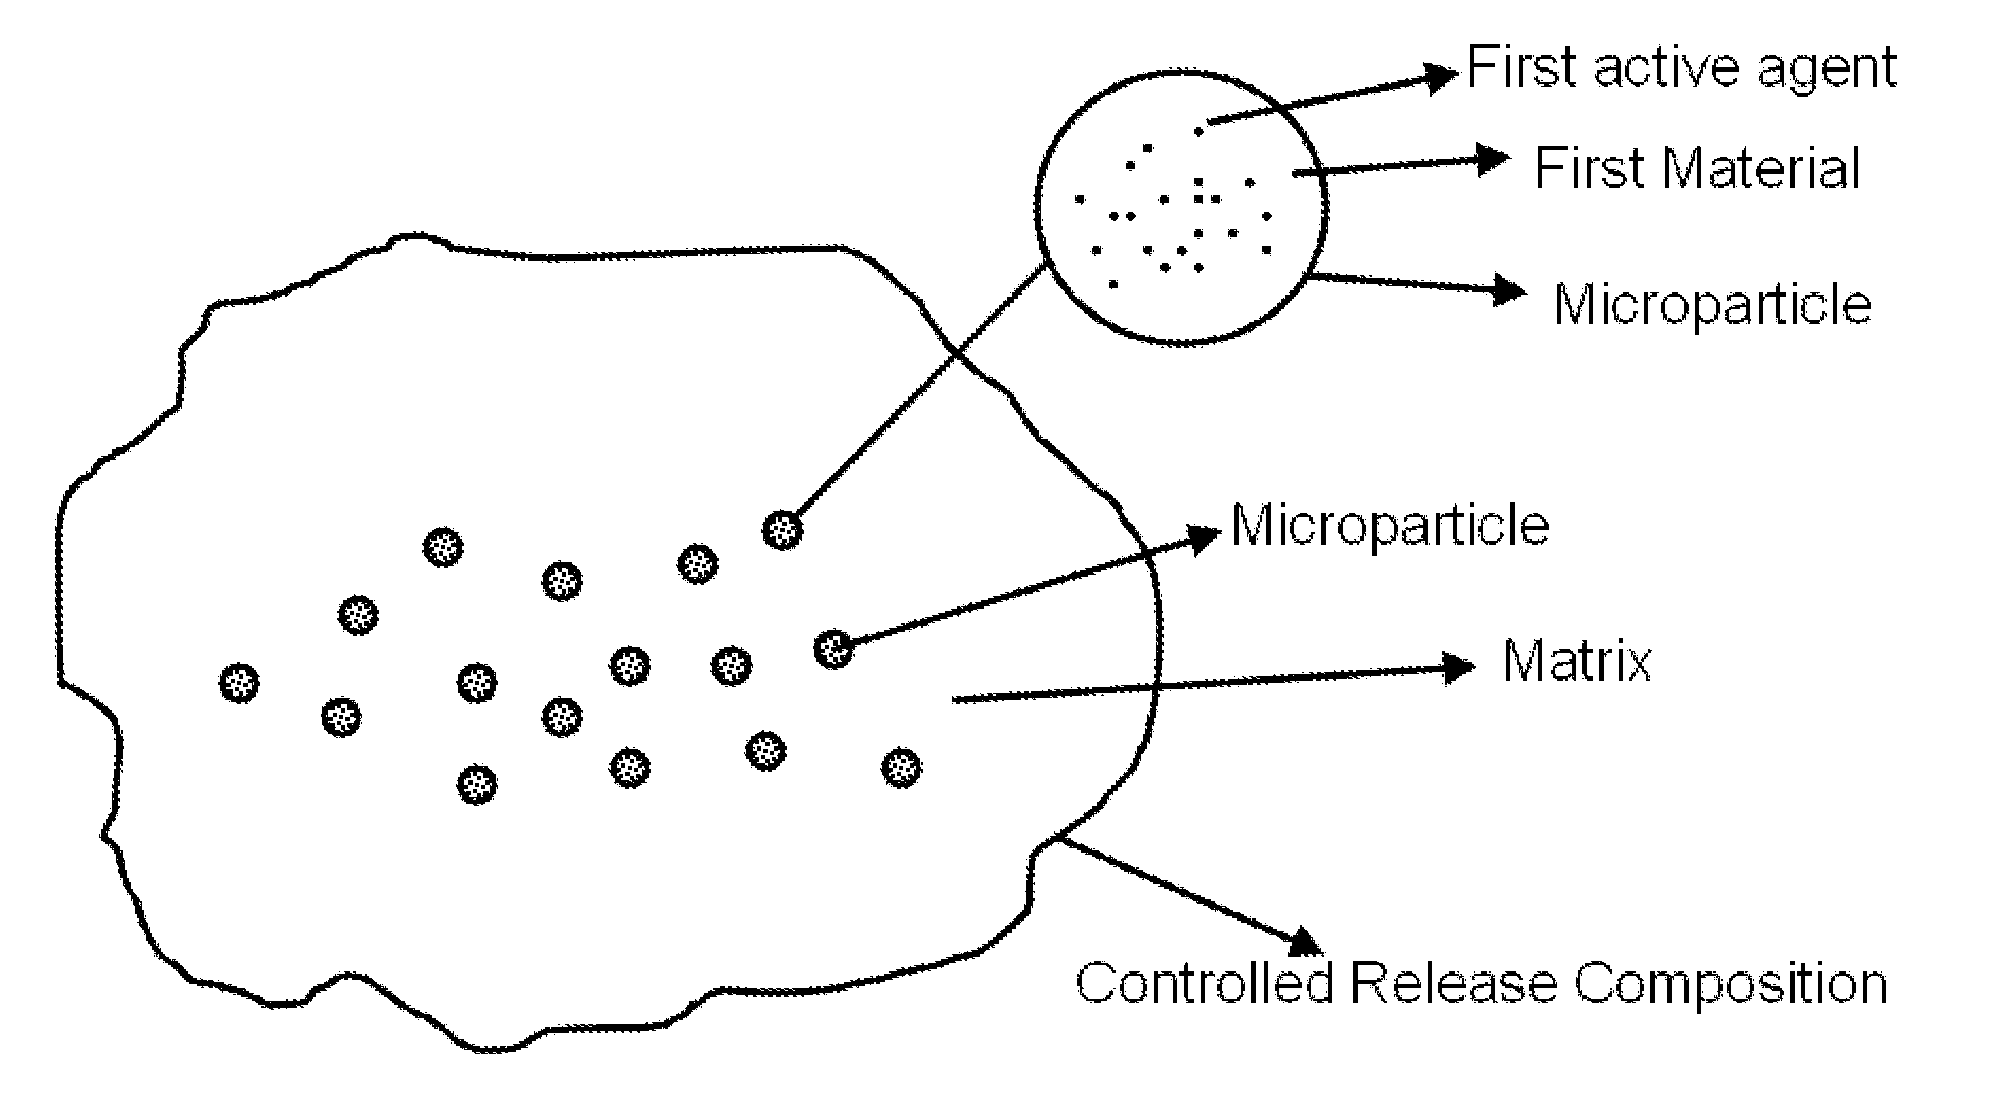 Controlled releasing composition